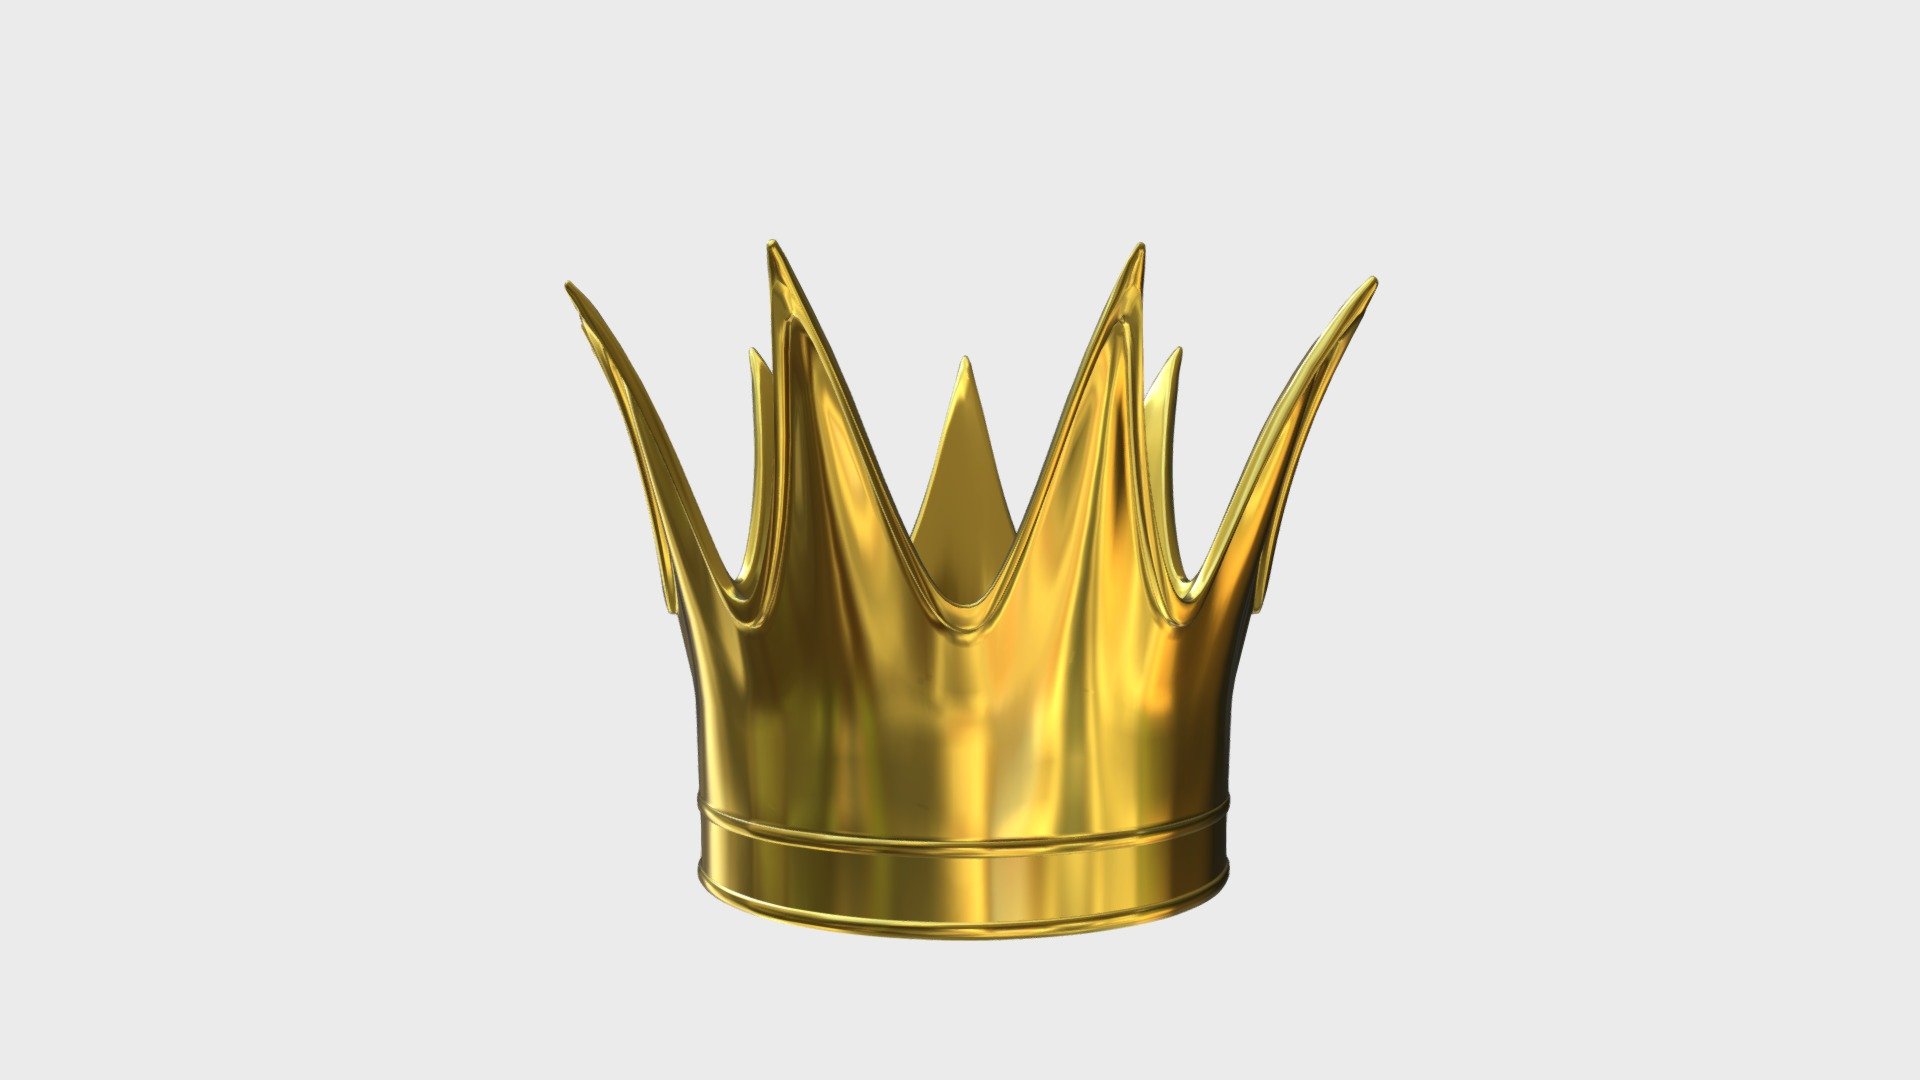 === The following description refers to the additional ZIP package provided with this model ===

Gold crown 3D Model, nr. 4 in my collection. Production-ready 3D Model, with PBR materials, textures, non overlapping UV Layout map provided in the package.

Quads only geometries (no tris/ngons).

Formats included: FBX, OBJ; scenes: BLEND (with Cycles / Eevee PBR Materials and Textures); other: png with Alpha.

1 Object (mesh), 1 PBR Material, UV unwrapped (non overlapping UV Layout map provided in the package); UV-mapped Textures.

UV Layout maps and Image Textures resolutions: 2048x2048; PBR Textures made with Substance Painter.

Polygonal, QUADS ONLY (no tris/ngons); 21870 vertices, 21870 quad faces (43740 tris).

Real world dimensions; scene scale units: cm in Blender 3.1 (that is: Metric with 0.01 scale).

Uniform scale object (scale applied in Blender 3.1) 3d model